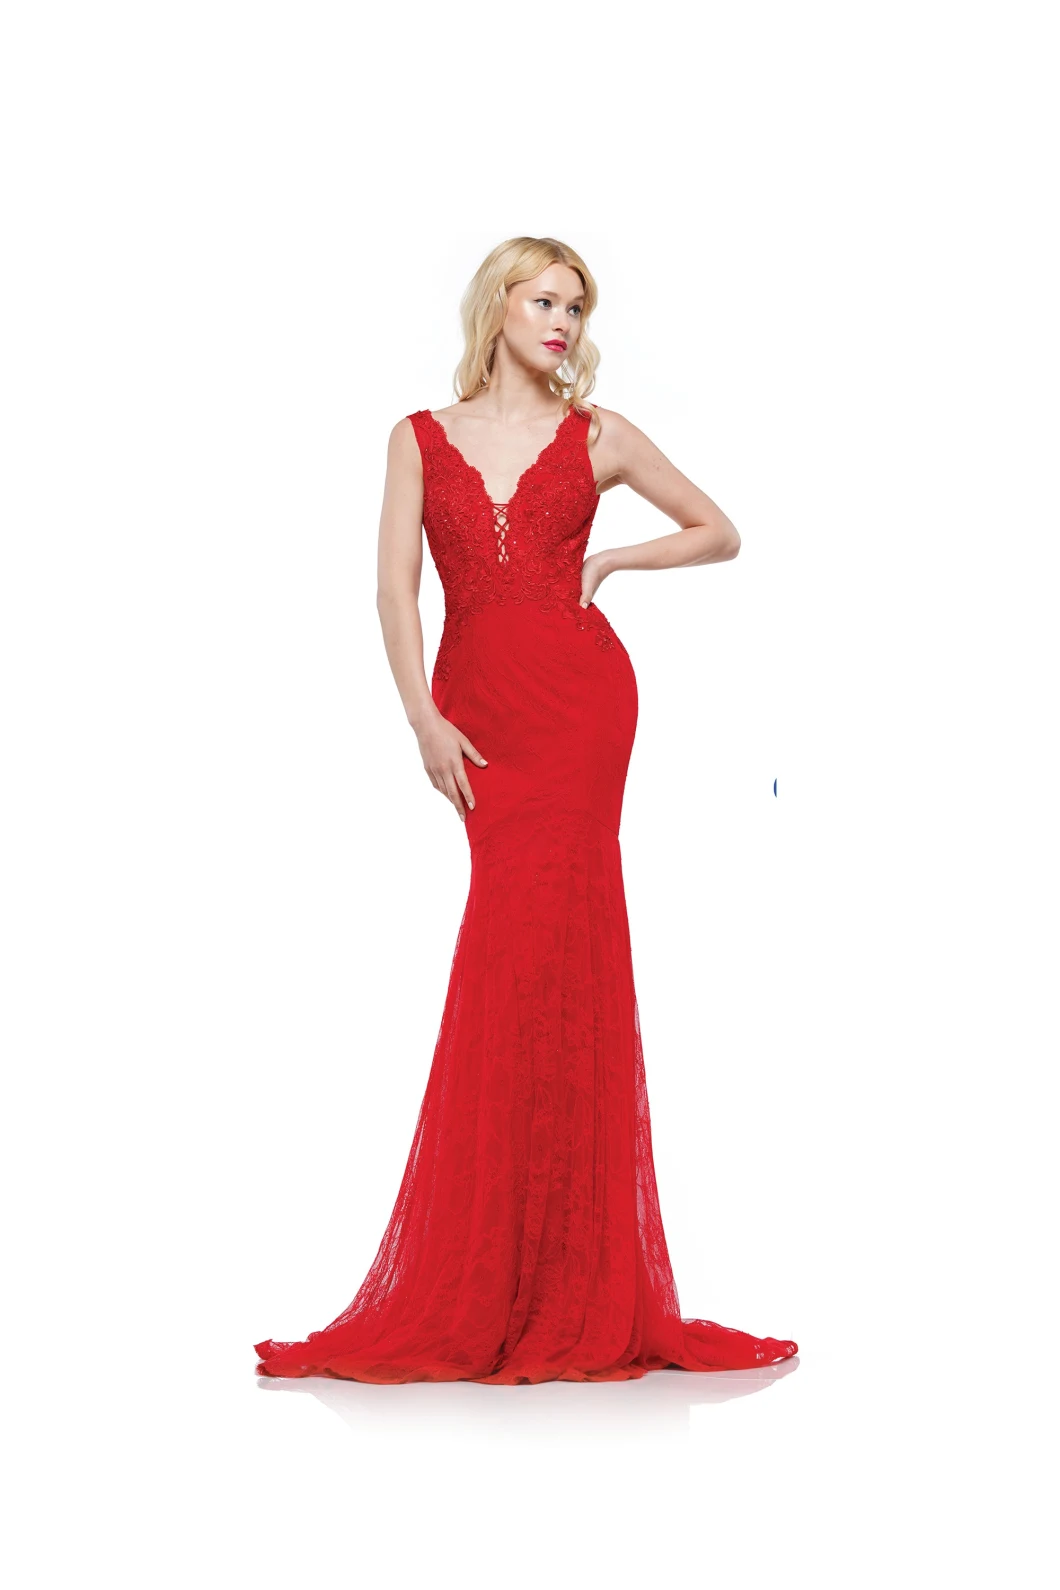 Mermaid Lace Prom Party Dresses Red 15 Dress Tulle Backless Evening Dress